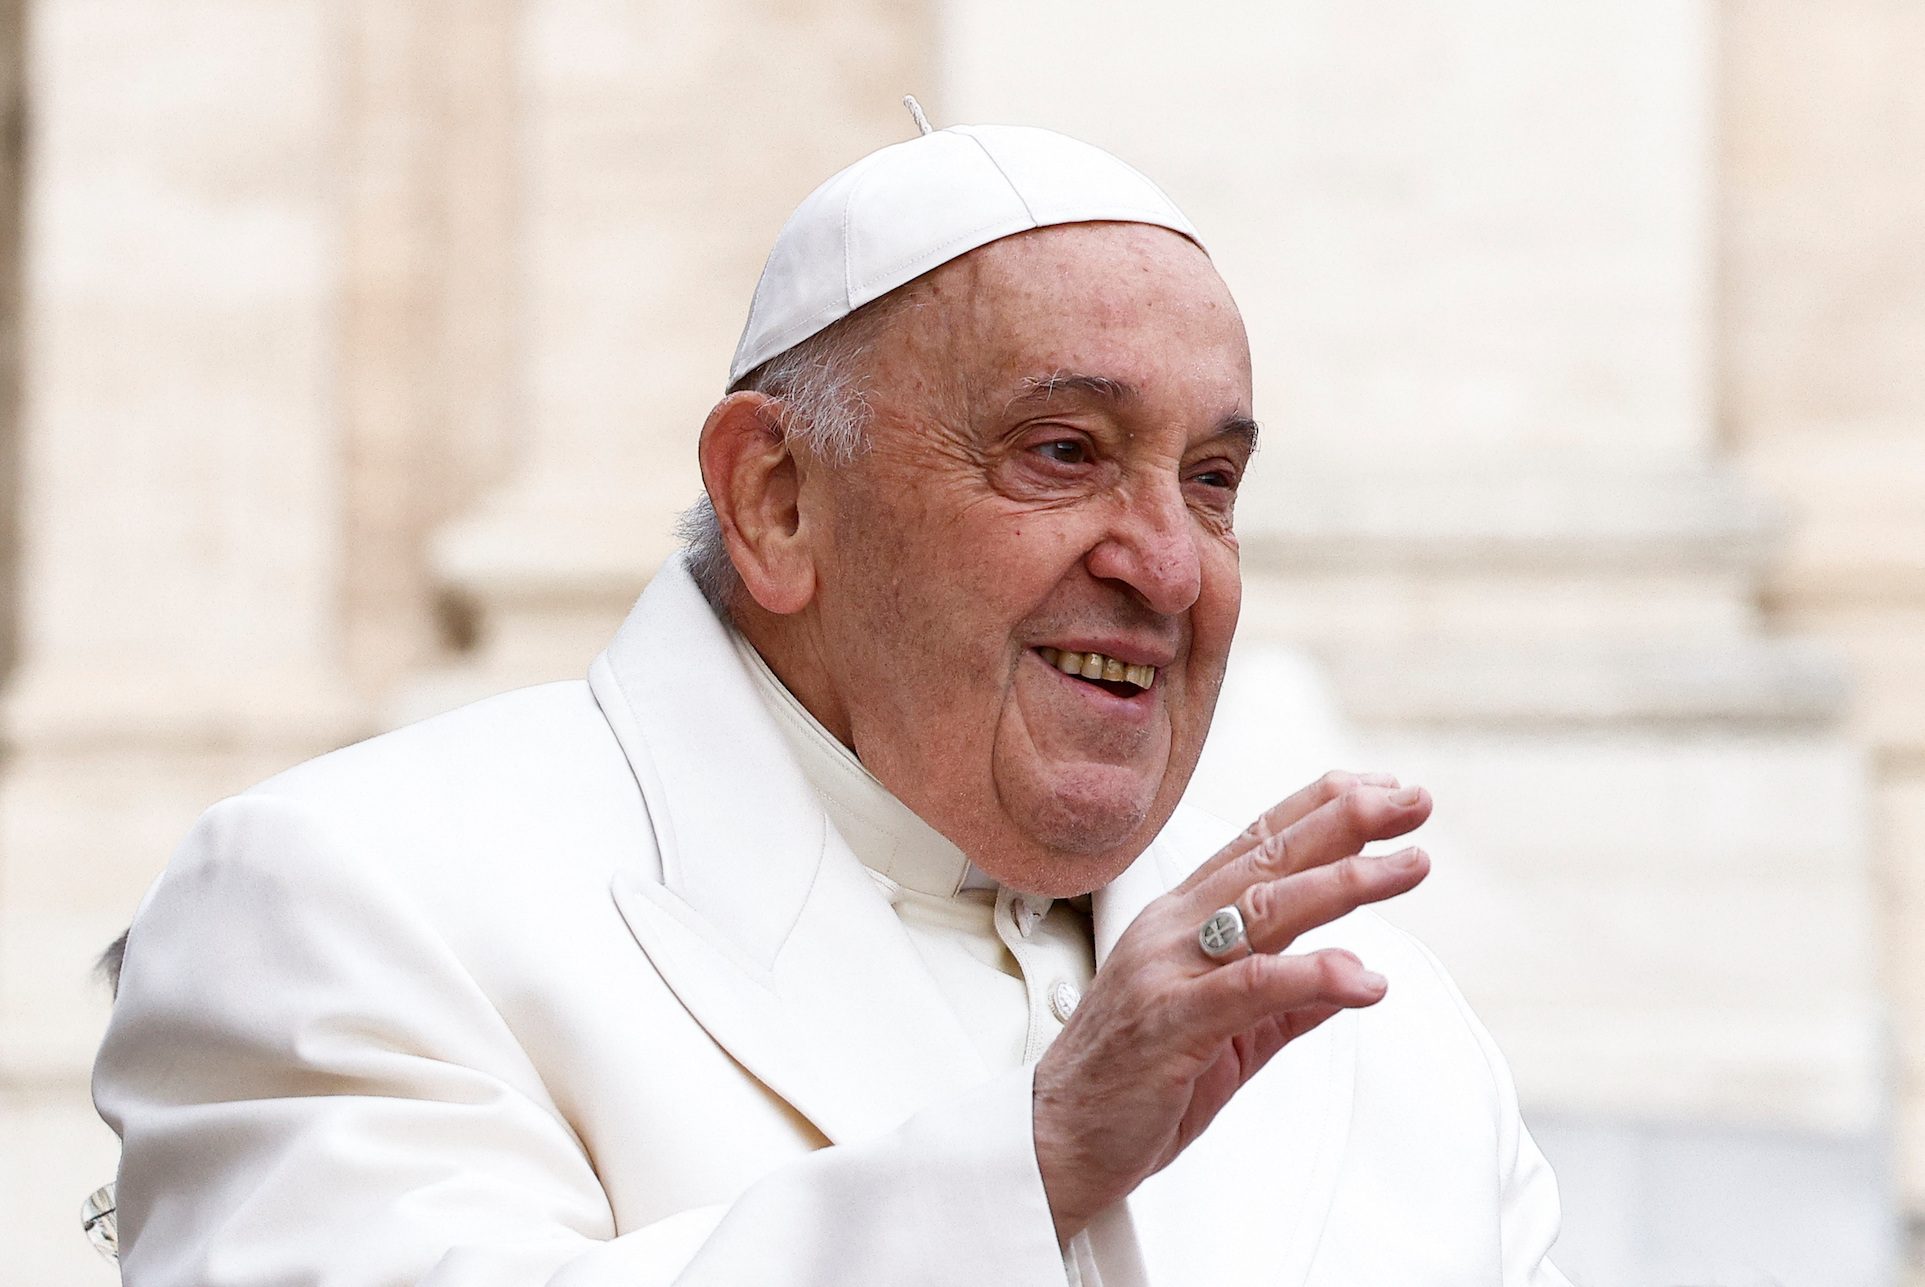 Frail pope to embark on Asia trip, his longest ever, in September